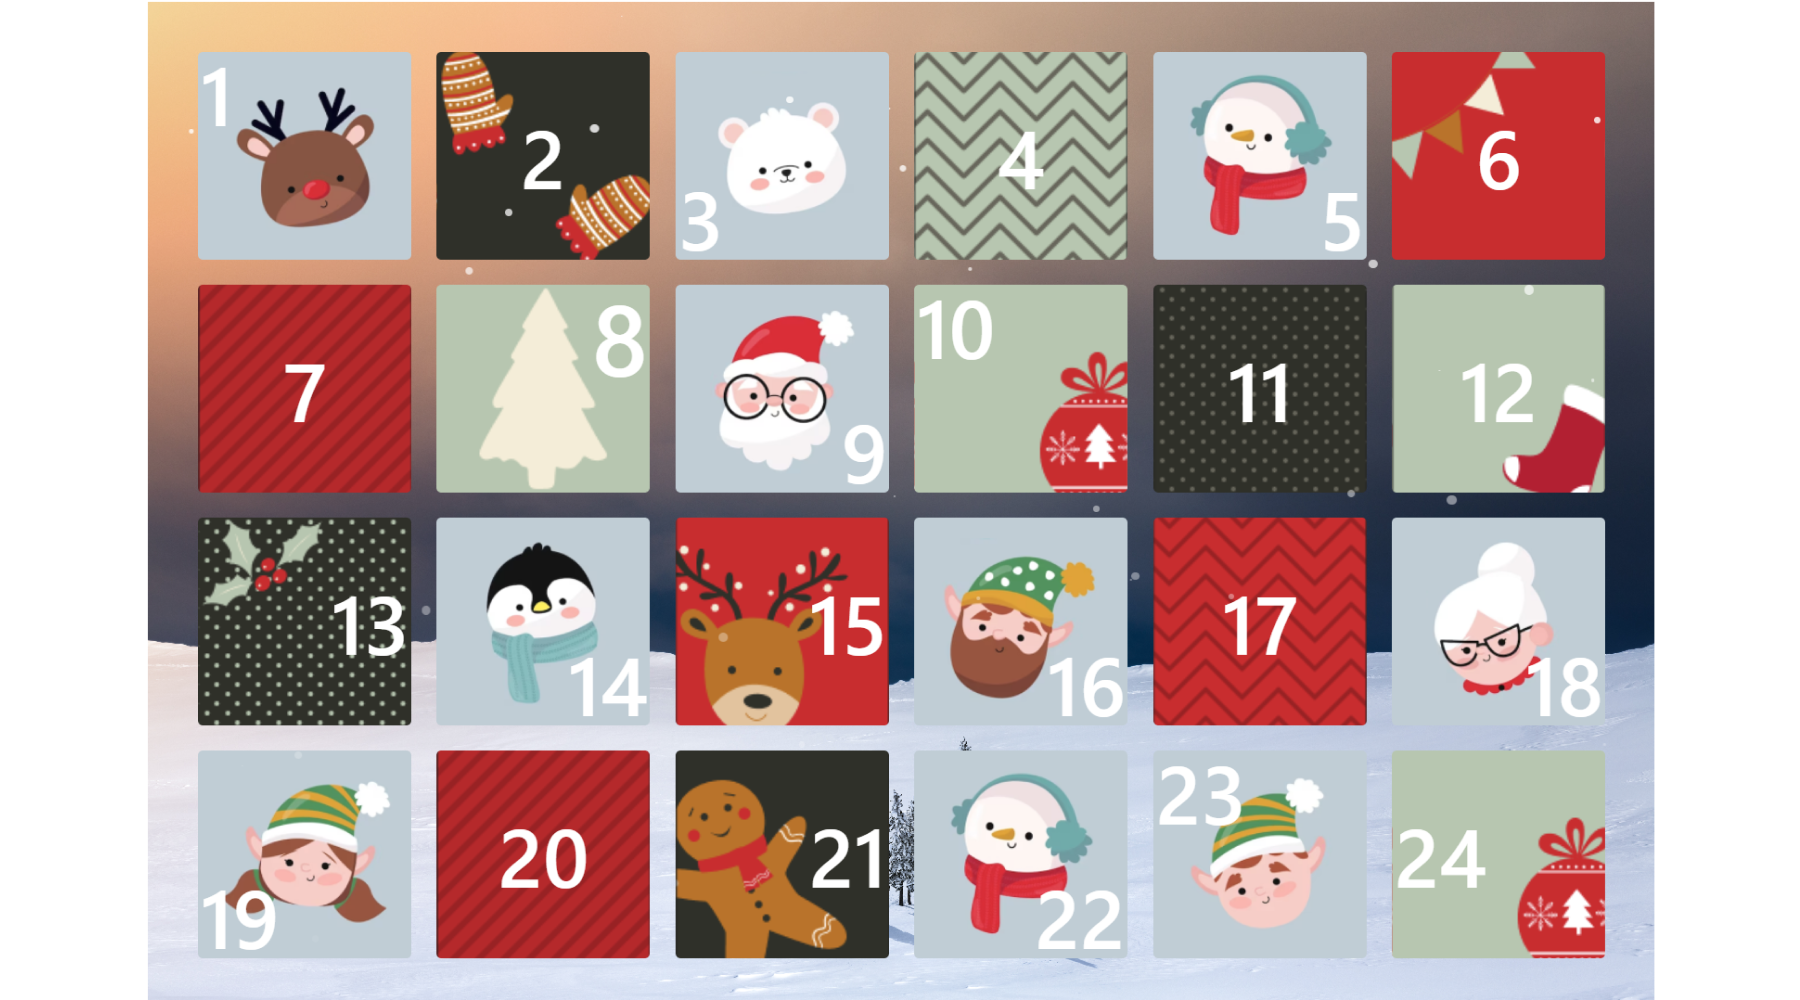 Countdown to Christmas with the Advent Calendar app!